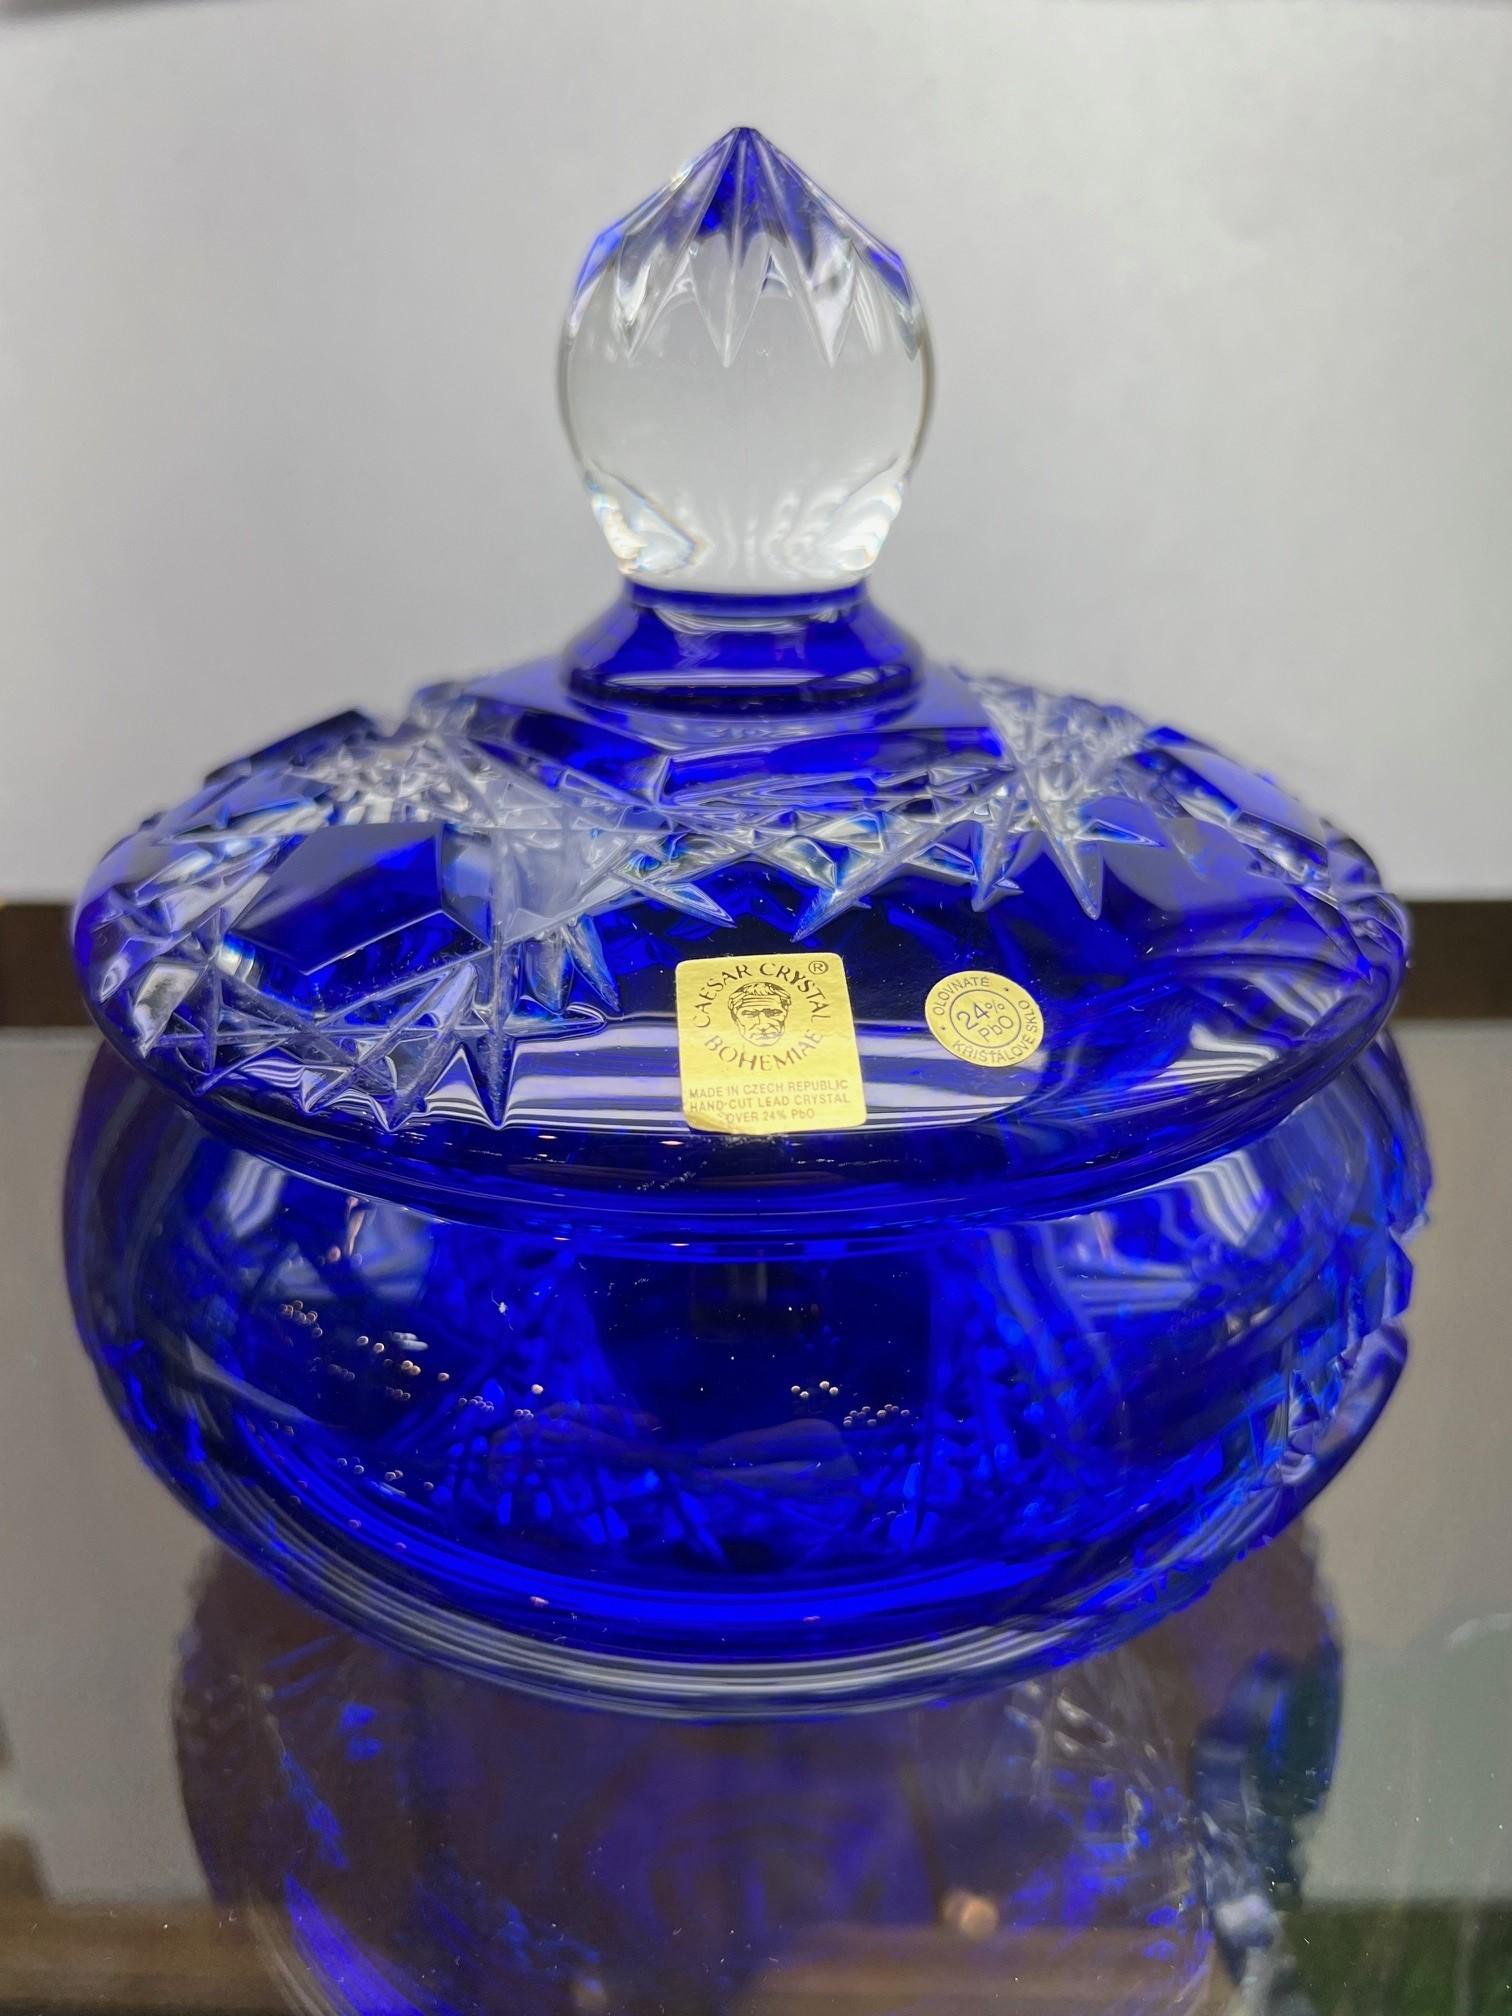 Stunning hand cut lead crystal candy dish with a cover created as a work of art by the hands of the finest Czech glass workers. The Caesar Crystal Company in the Czech Republic has been selling hand cut lead crystal pieces since 1861 and is known as